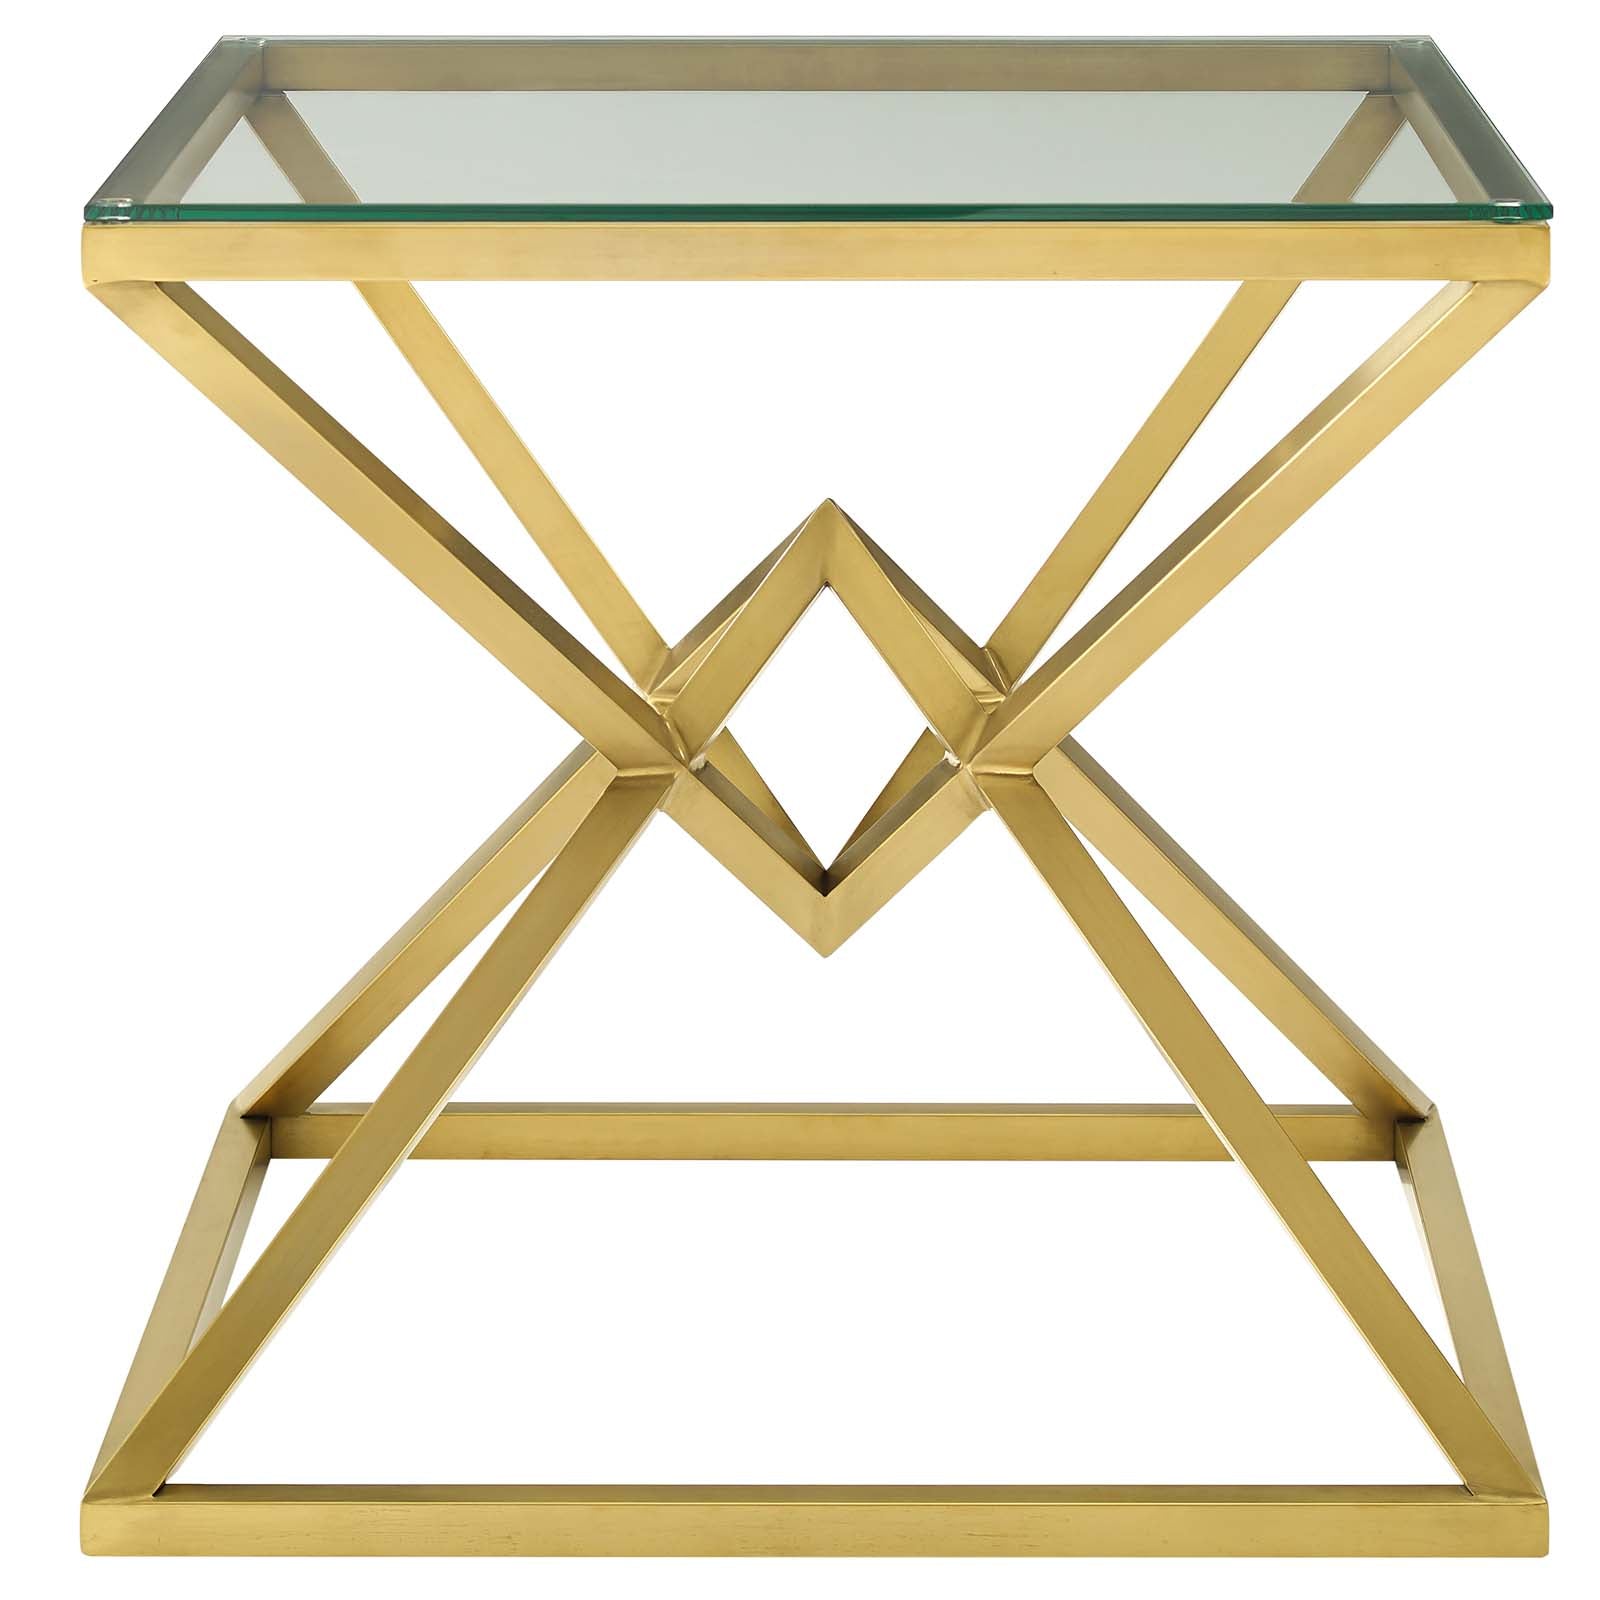 Point 25.5" Brushed Gold Metal Stainless Steel Side Table - East Shore Modern Home Furnishings